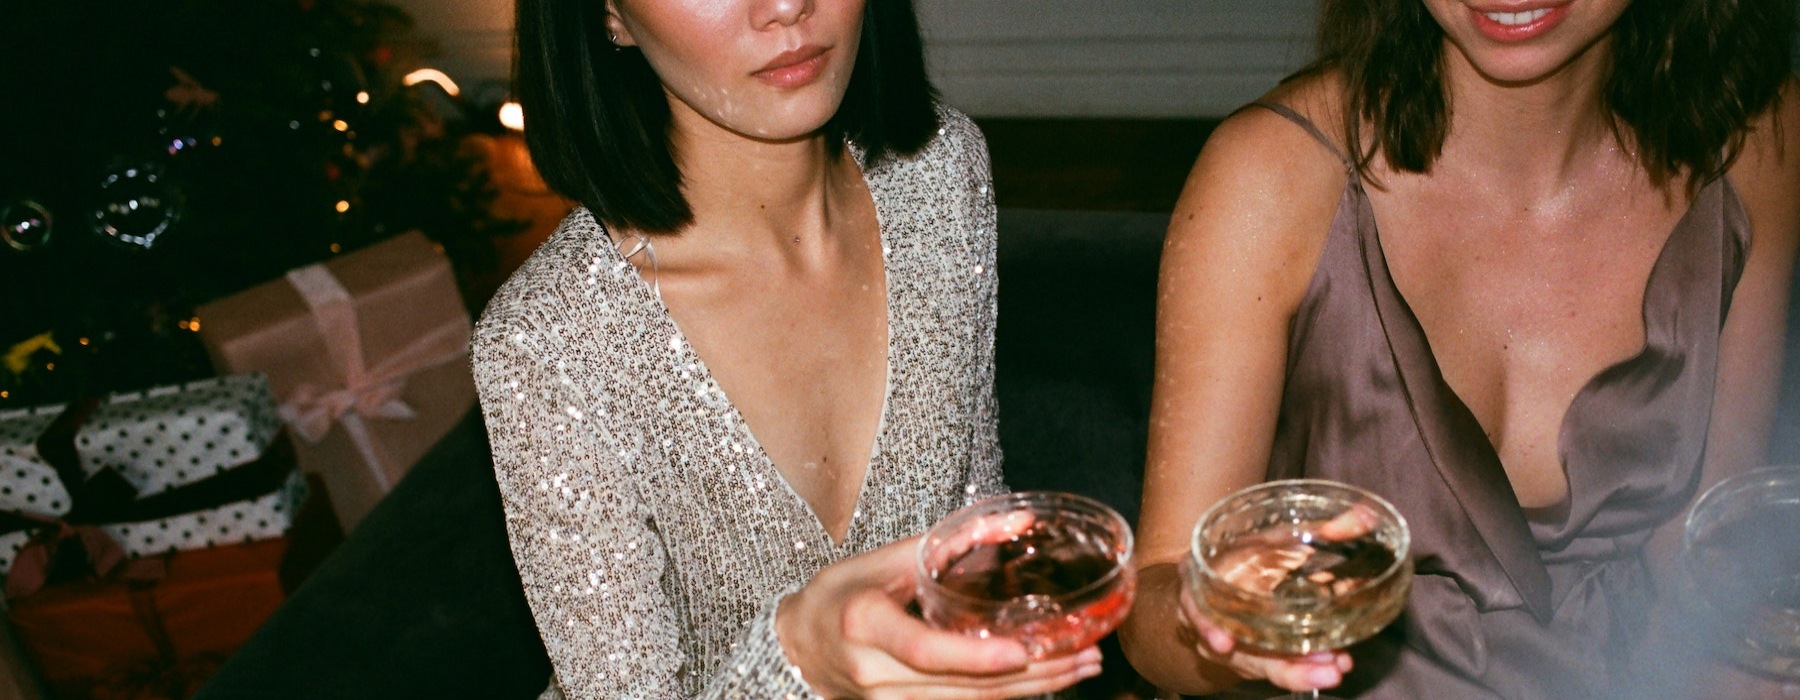 lifestyle image of glossy dresses and women holding their cocktails